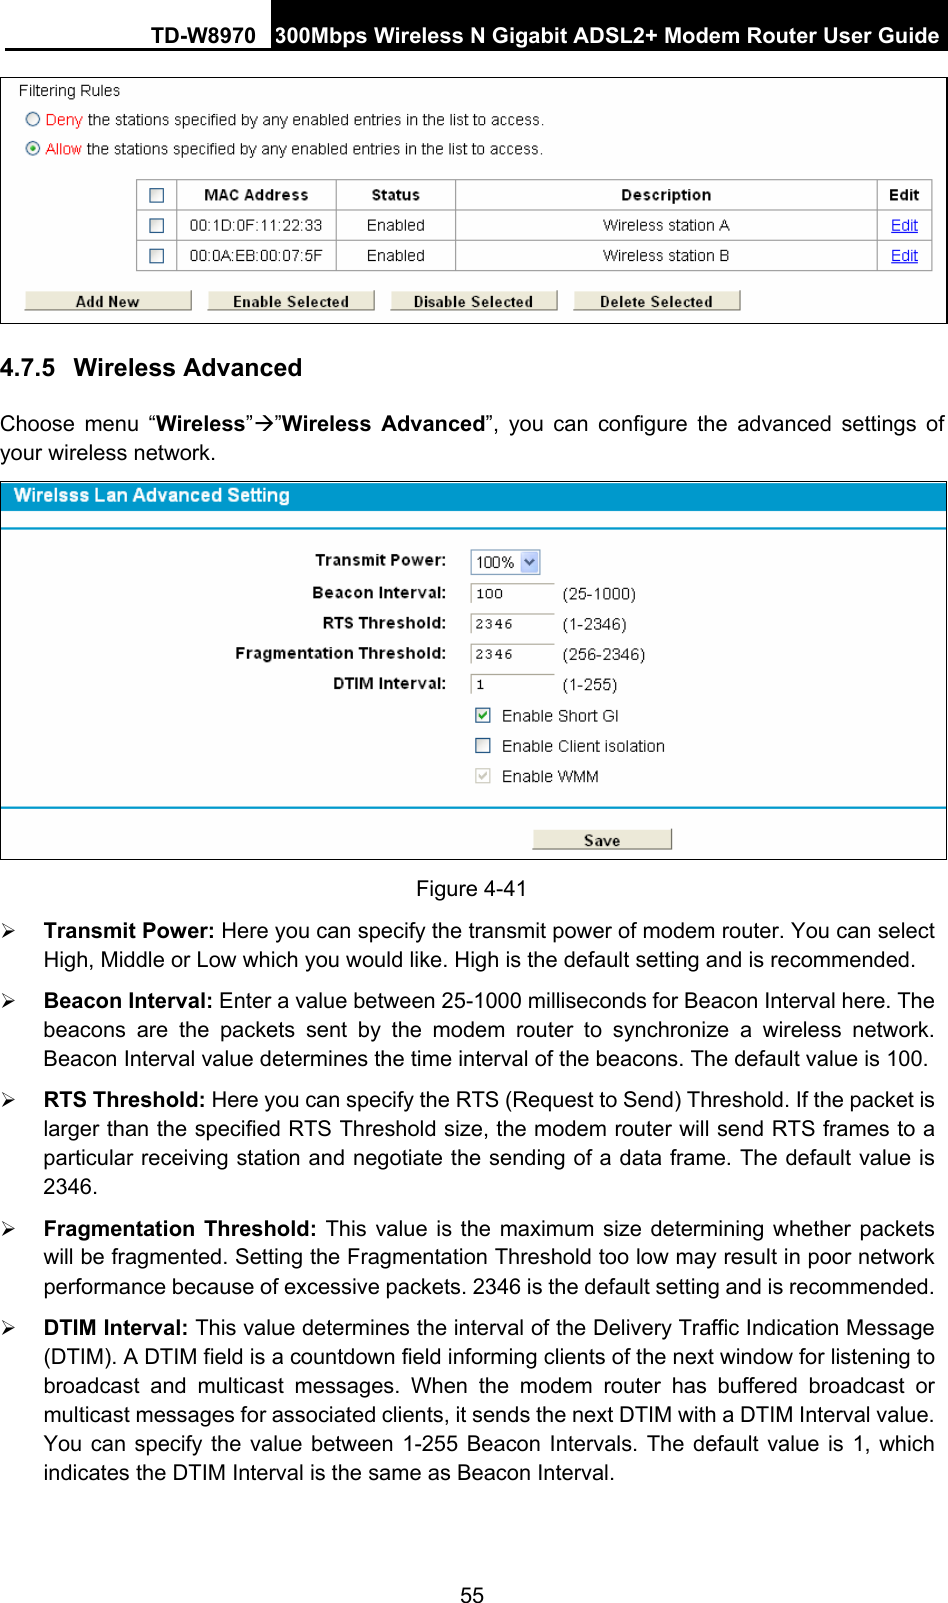 TD-W8970 300Mbps Wireless N Gigabit ADSL2+ Modem Router User Guide 55  4.7.5  Wireless Advanced Choose menu “Wireless”Æ”Wireless Advanced”, you can configure the advanced settings of your wireless network.  Figure 4-41 ¾ Transmit Power: Here you can specify the transmit power of modem router. You can select High, Middle or Low which you would like. High is the default setting and is recommended. ¾ Beacon Interval: Enter a value between 25-1000 milliseconds for Beacon Interval here. The beacons are the packets sent by the modem router to synchronize a wireless network. Beacon Interval value determines the time interval of the beacons. The default value is 100.   ¾ RTS Threshold: Here you can specify the RTS (Request to Send) Threshold. If the packet is larger than the specified RTS Threshold size, the modem router will send RTS frames to a particular receiving station and negotiate the sending of a data frame. The default value is 2346.  ¾ Fragmentation Threshold: This value is the maximum size determining whether packets will be fragmented. Setting the Fragmentation Threshold too low may result in poor network performance because of excessive packets. 2346 is the default setting and is recommended.   ¾ DTIM Interval: This value determines the interval of the Delivery Traffic Indication Message (DTIM). A DTIM field is a countdown field informing clients of the next window for listening to broadcast and multicast messages. When the modem router has buffered broadcast or multicast messages for associated clients, it sends the next DTIM with a DTIM Interval value. You can specify the value between 1-255 Beacon Intervals. The default value is 1, which indicates the DTIM Interval is the same as Beacon Interval.    